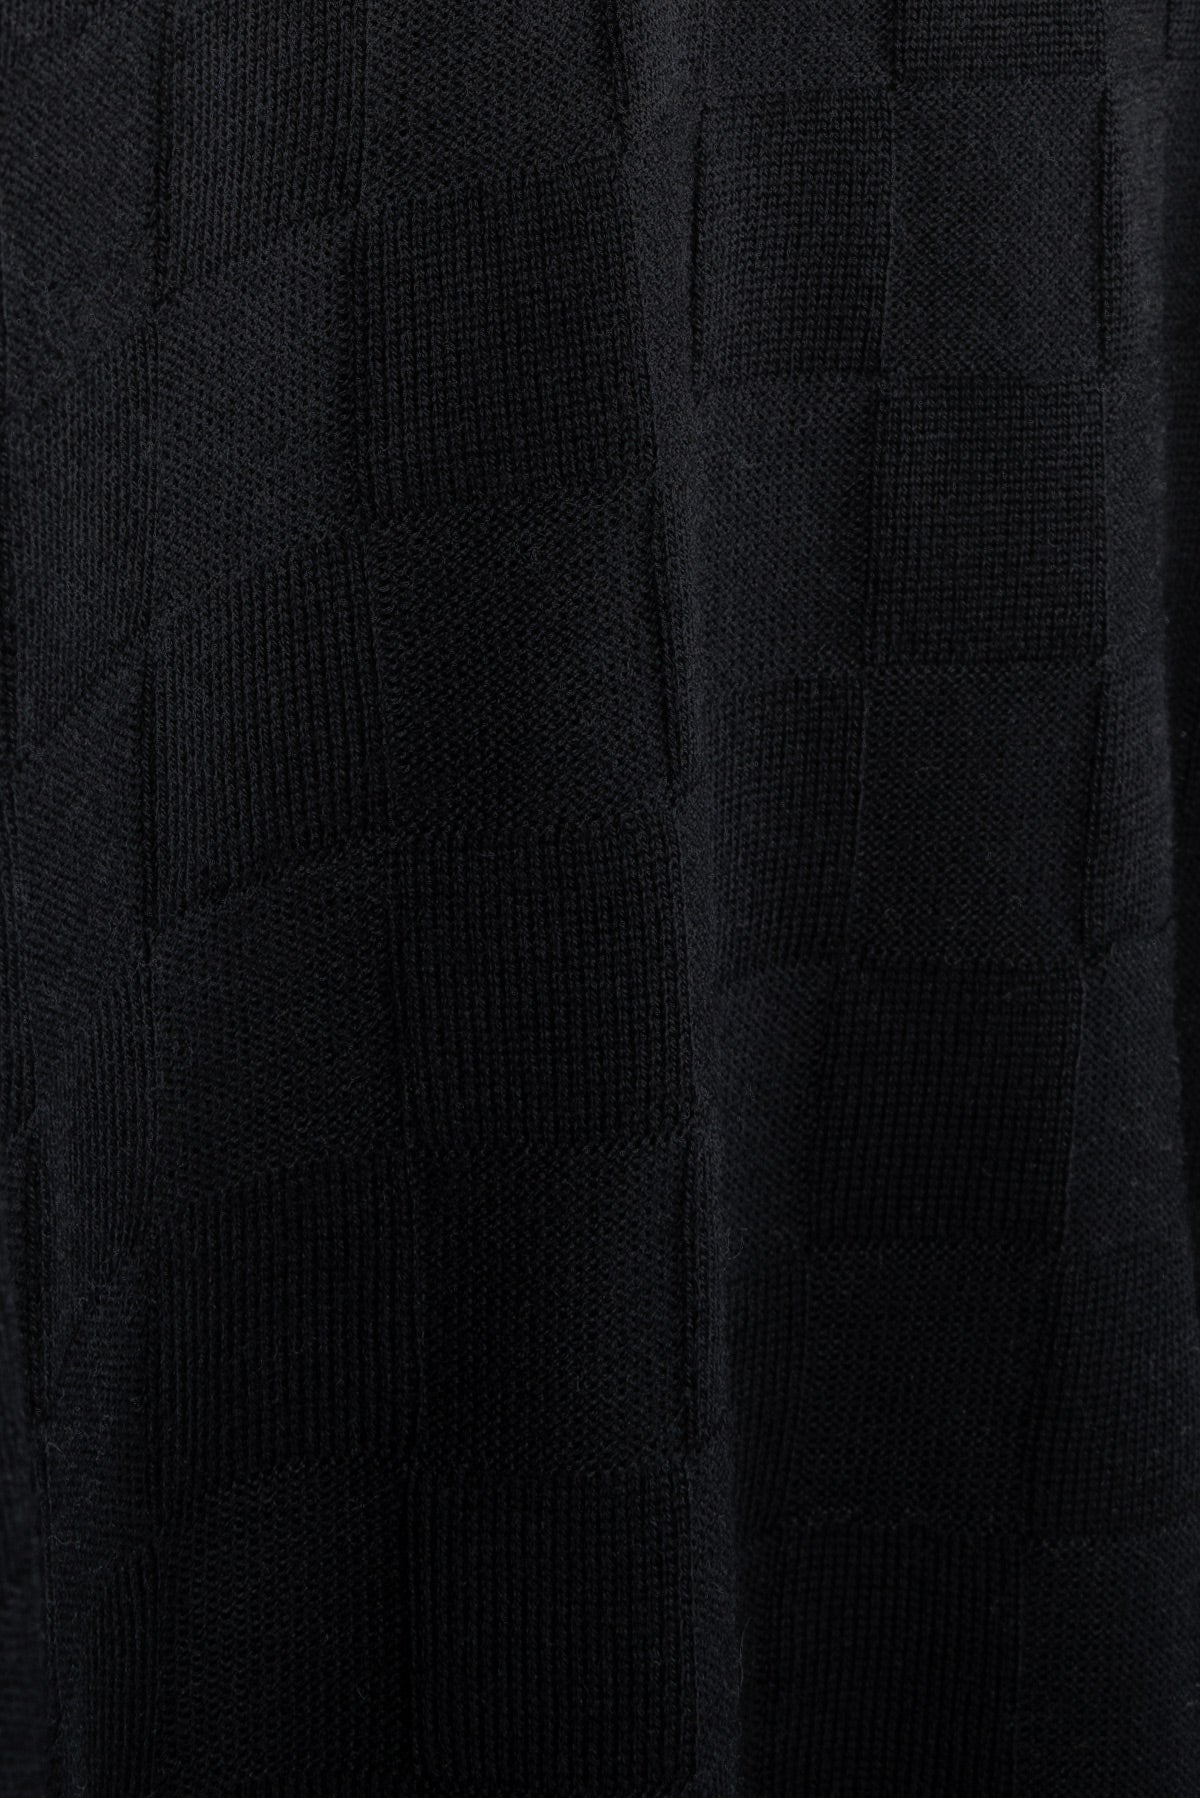 2008 A/W "CHESS" V-NECK SWEATER IN BLACK FINEST WOOL